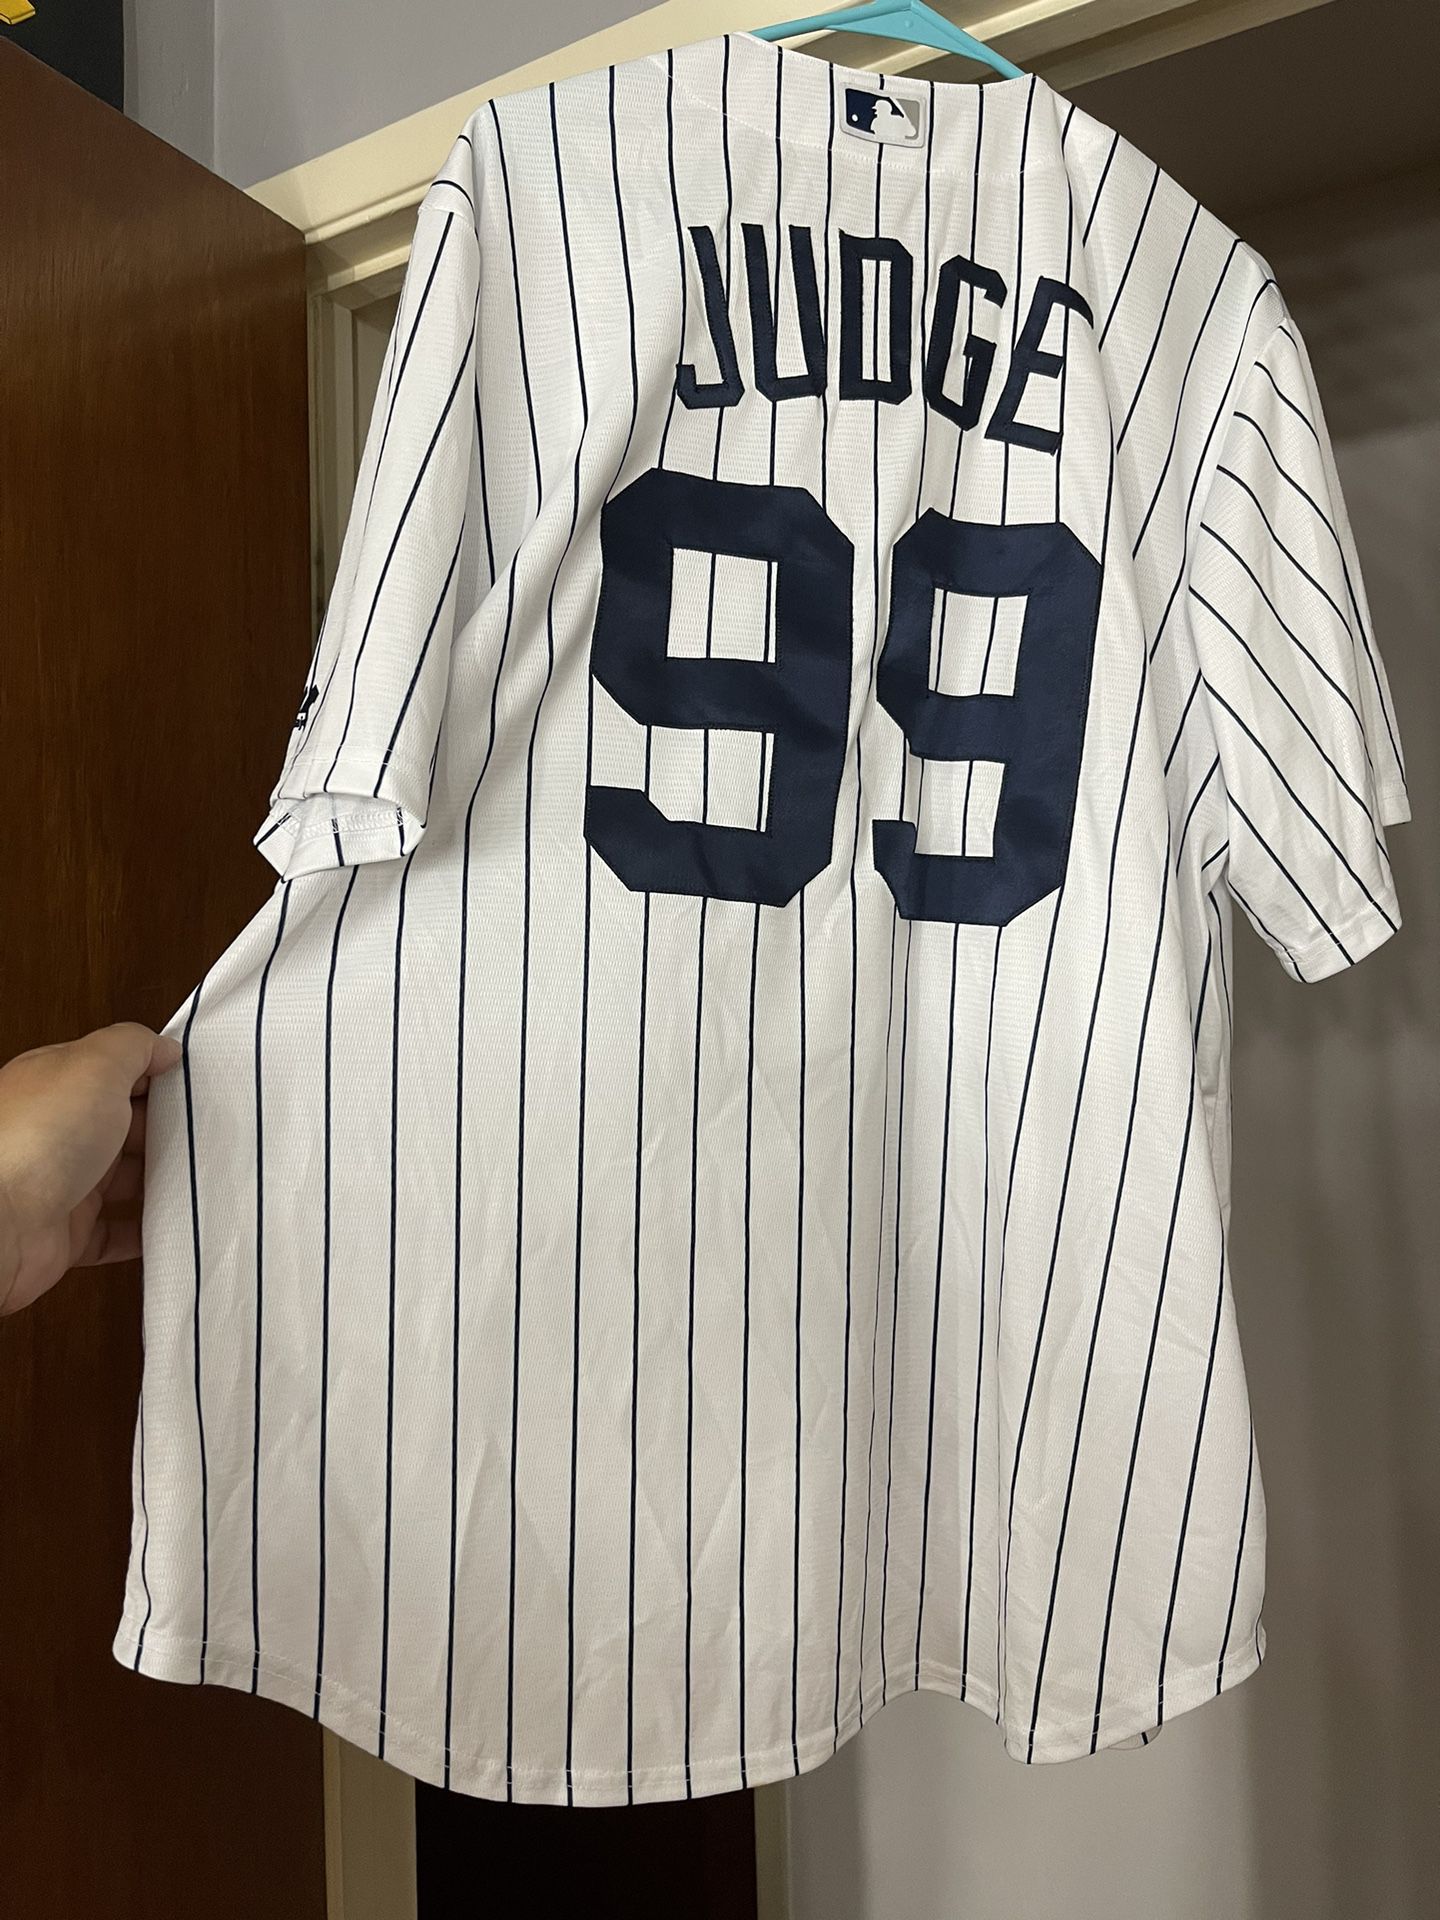 New York Yankees Aaron Judge #99 Jersey for Sale in Manchester, CT - OfferUp